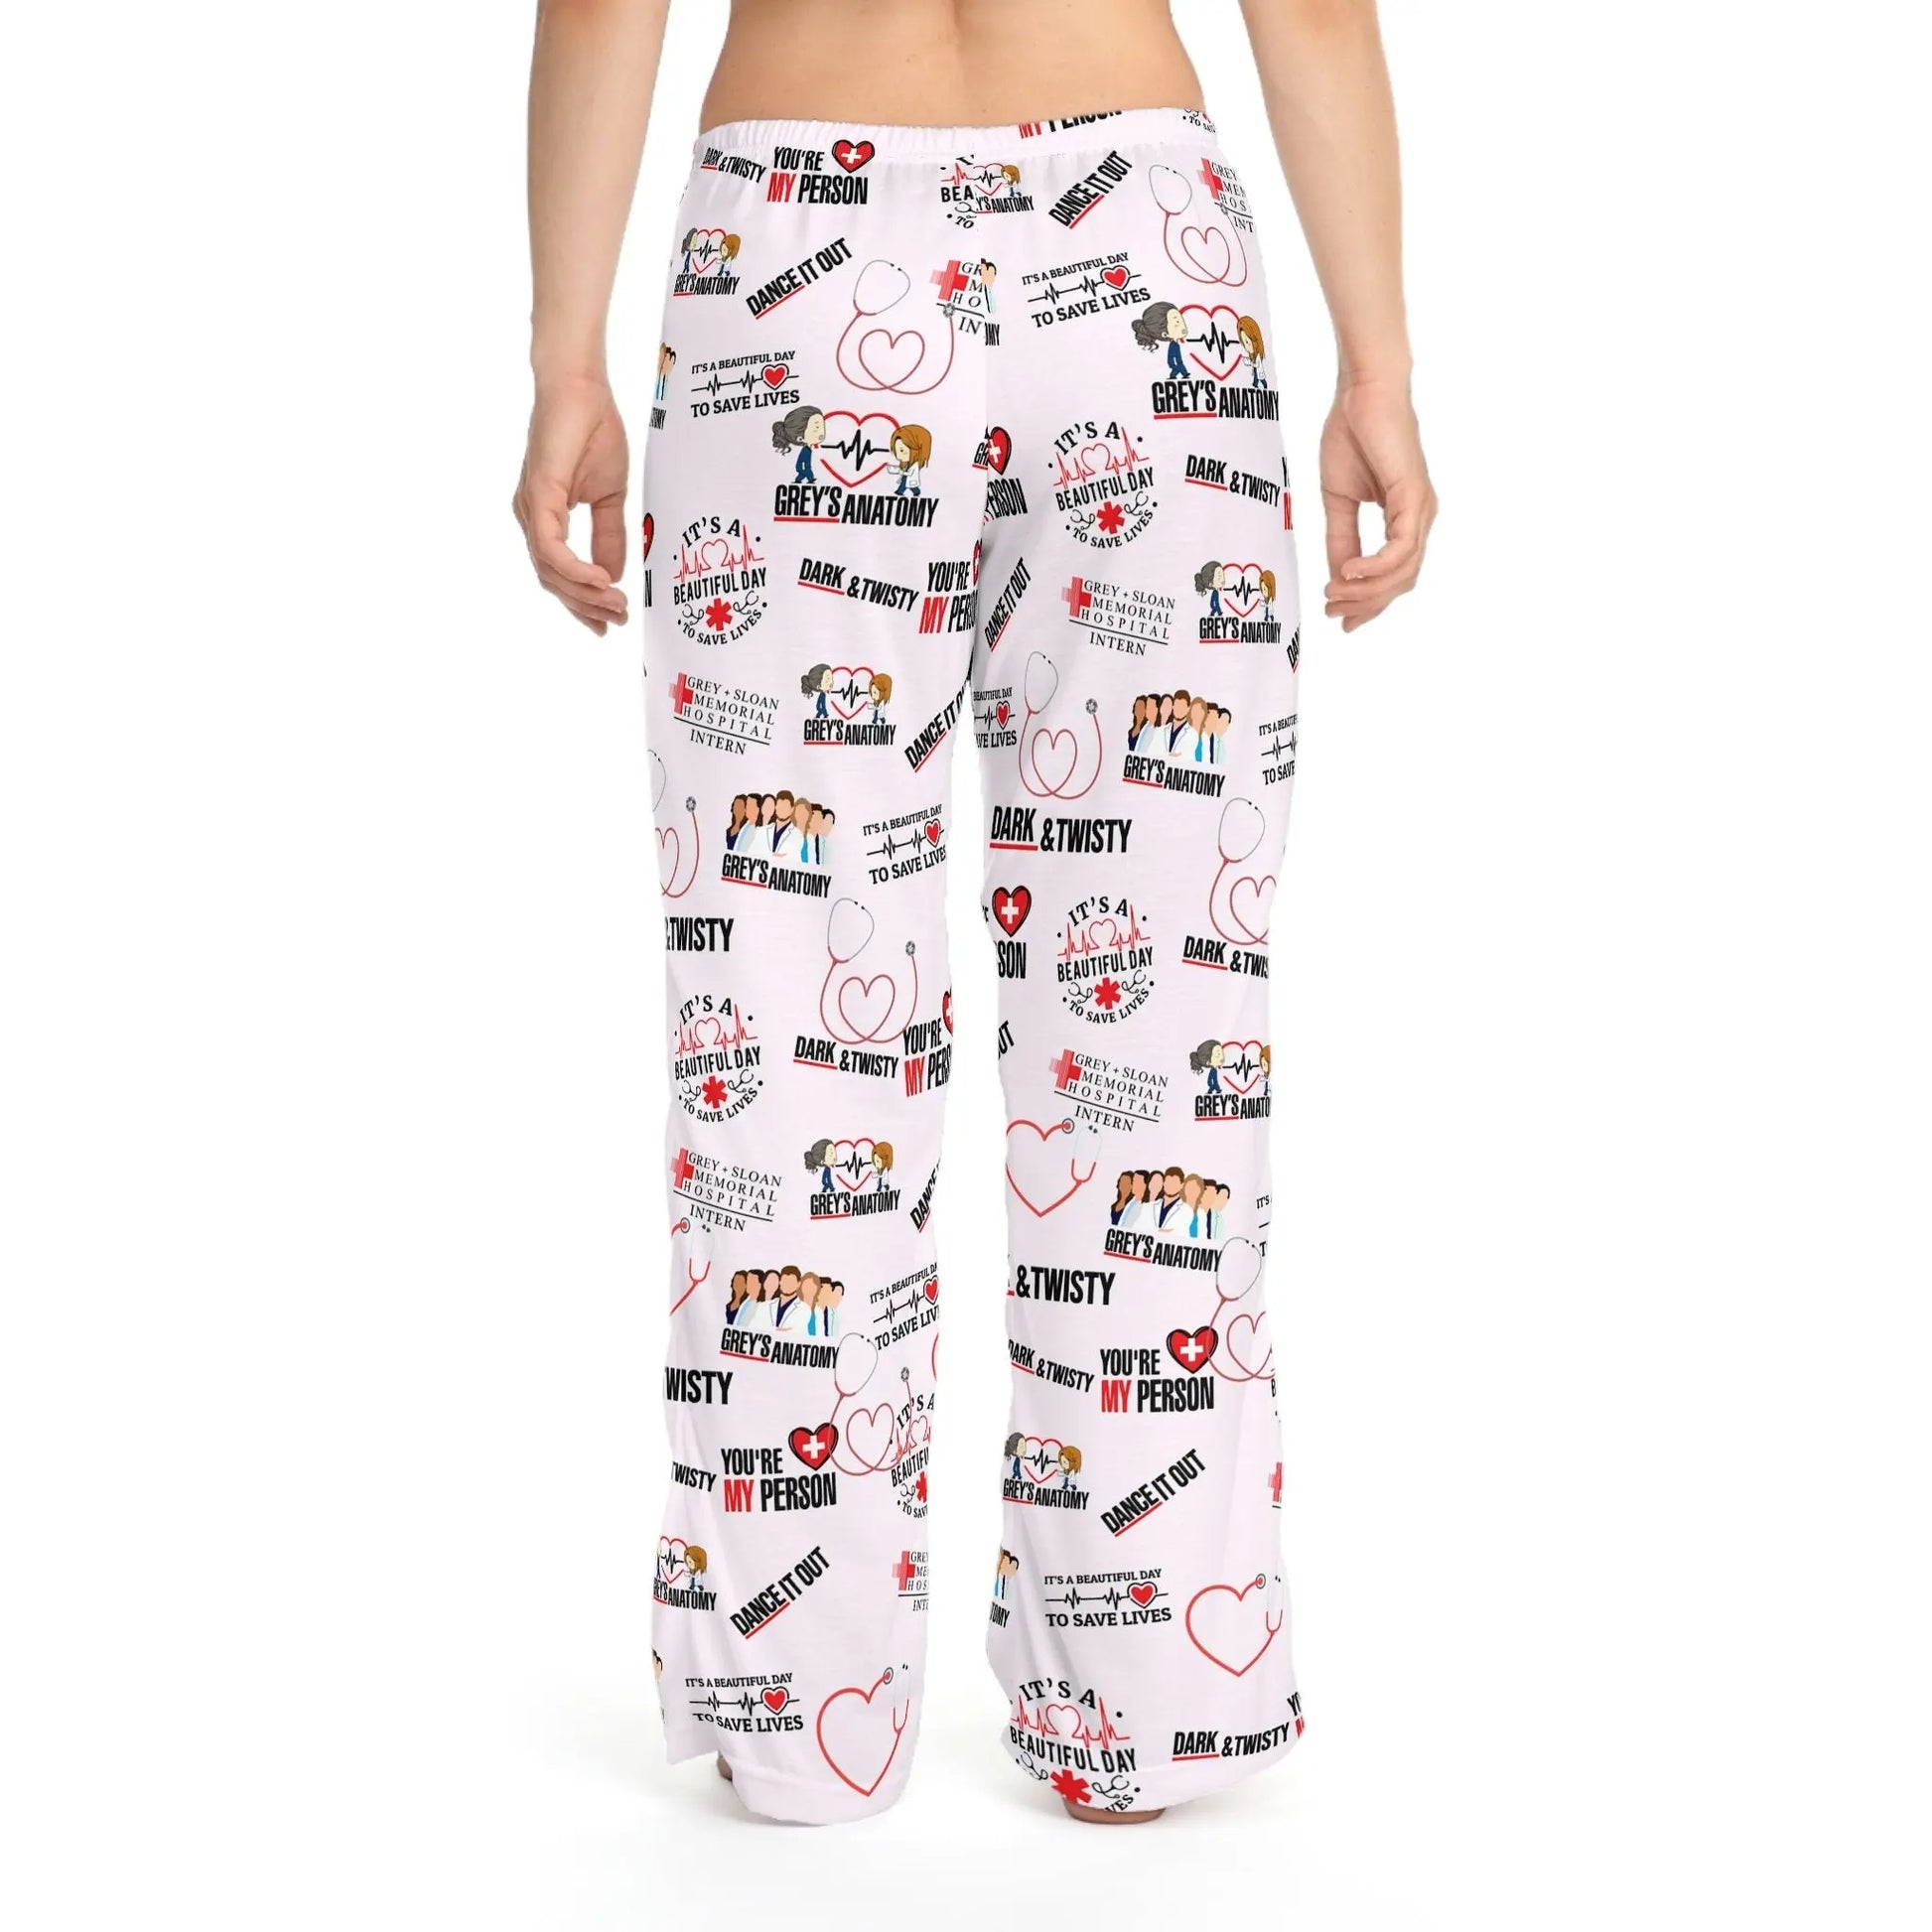 Greys Anatomy Women's Pajama Pants PJ Bottoms Valentines gift for her  gift for mom wife girlfriend Greys Anatomy Fans Youre my person Latchkey